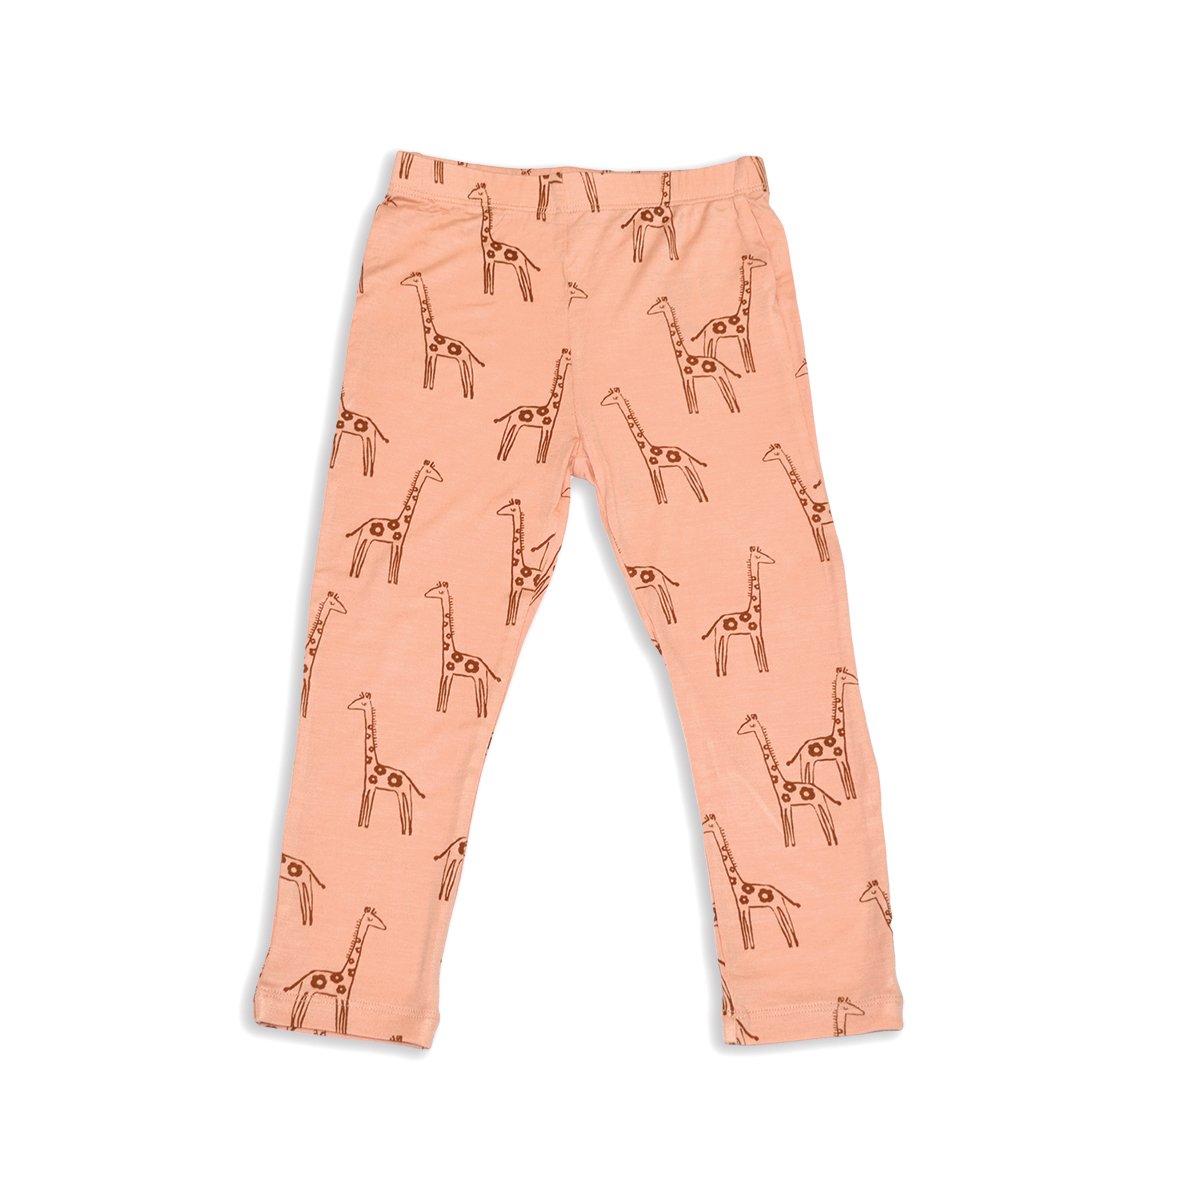 Buy Geifa Baby Printed leggings are very warm and cozy, great for